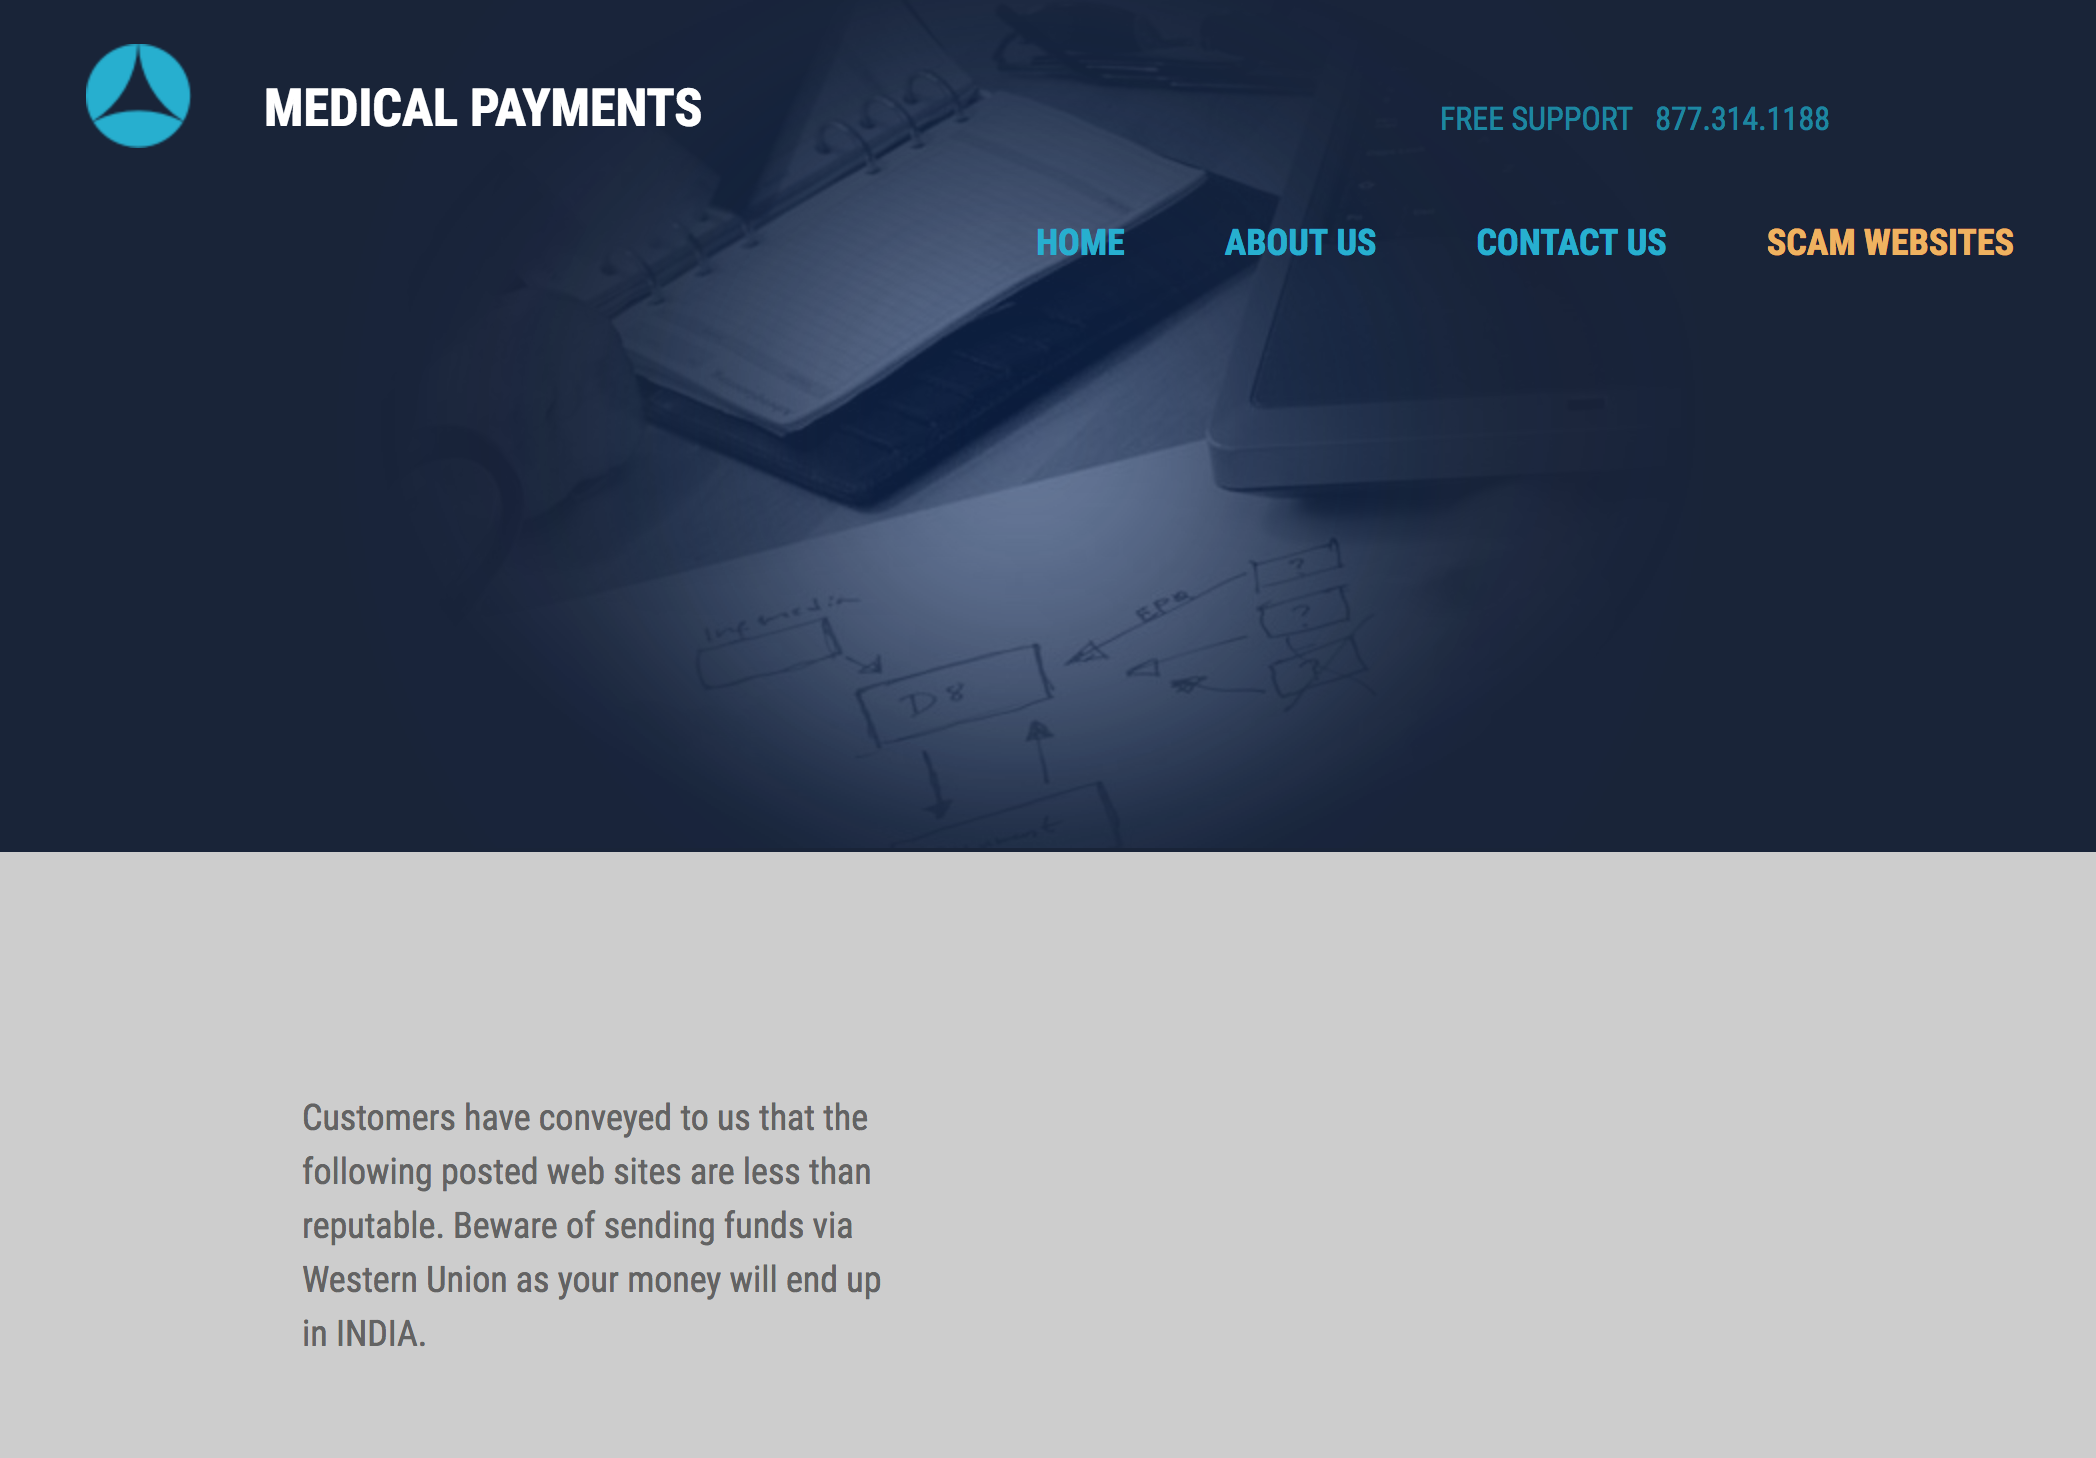 Medical Payments site needs to be shut down for stealing money orders!